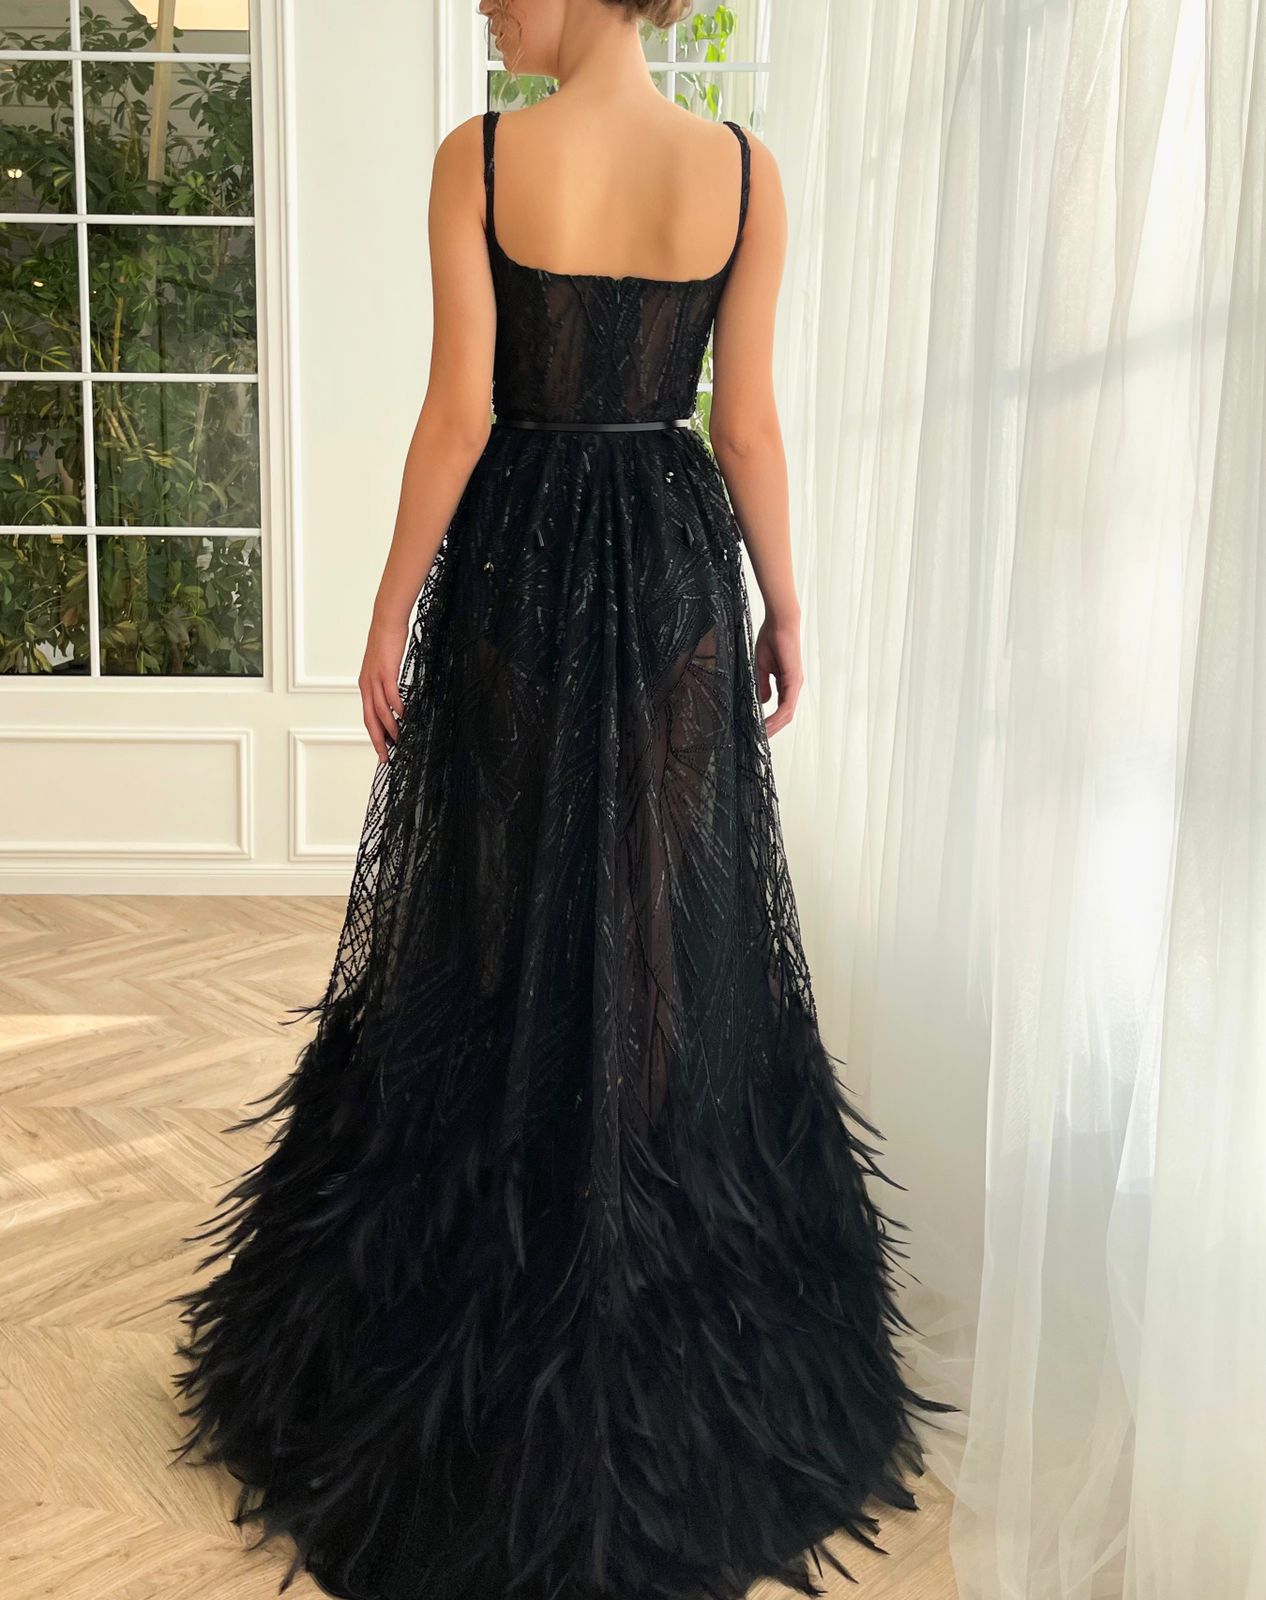 Black A-Line dress with spaghetti straps and feathers